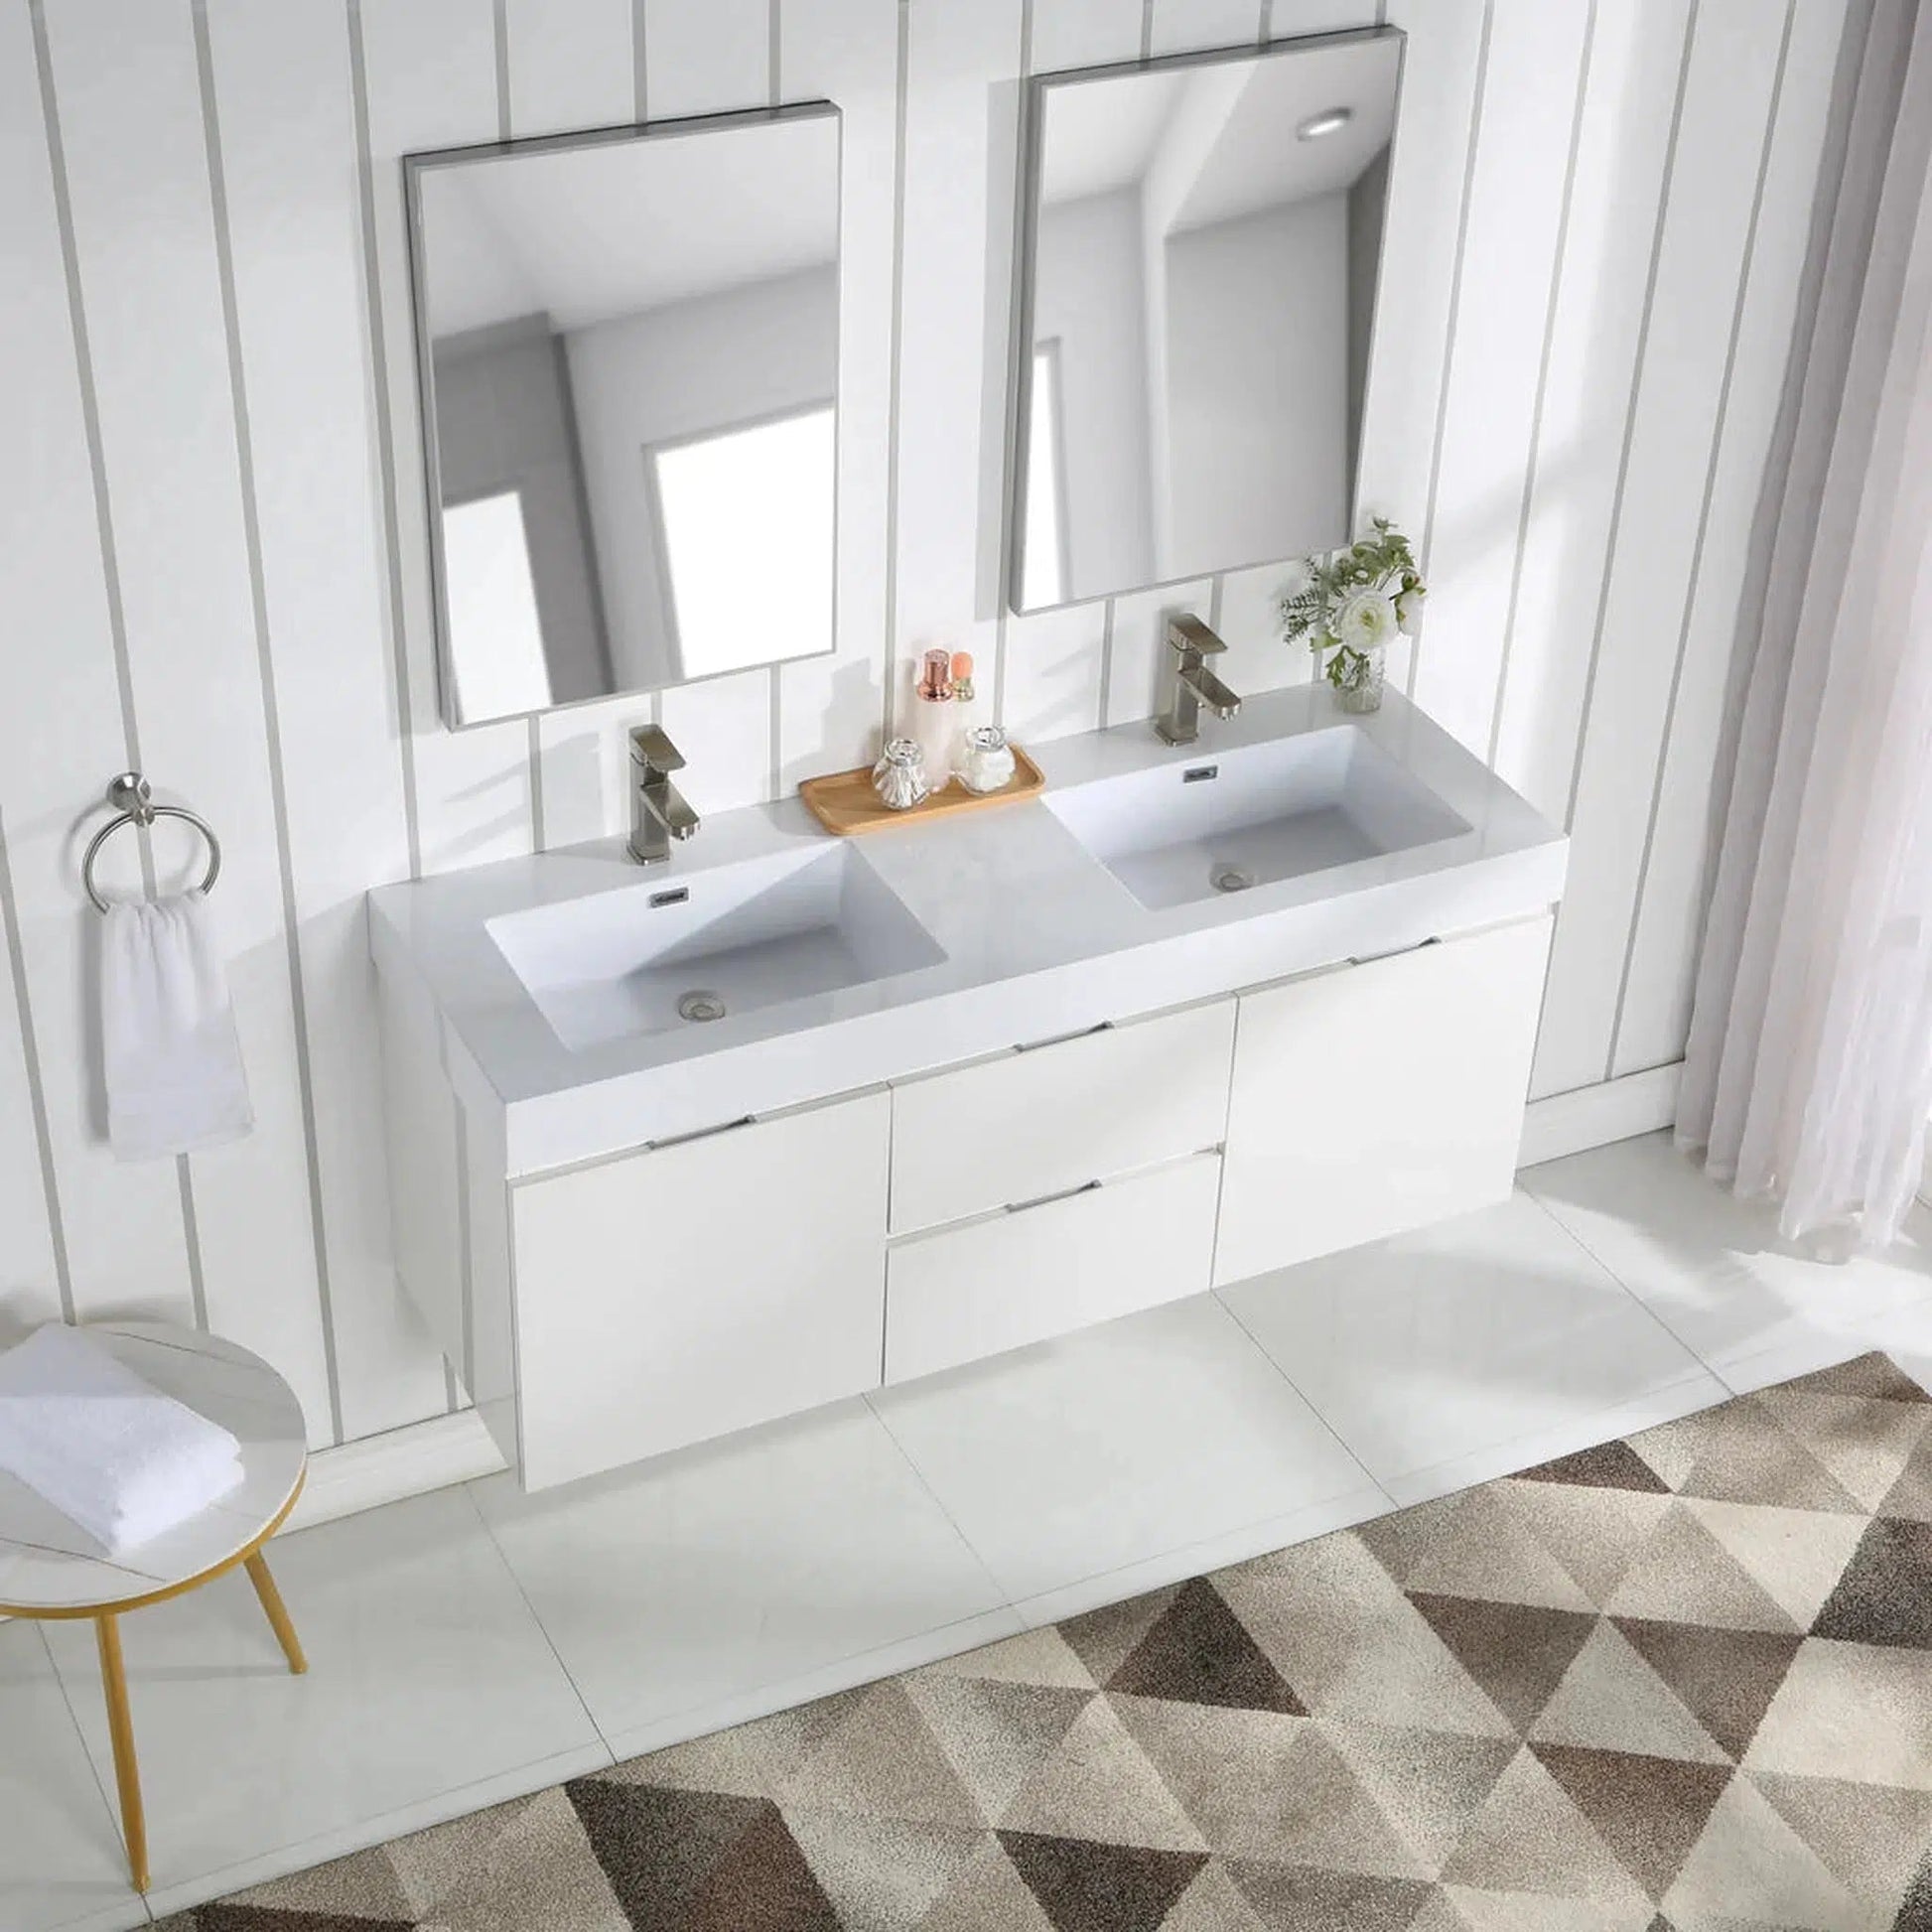 https://usbathstore.com/cdn/shop/products/Stufurhome-Valeria-59-Gloss-White-Wall-Mounted-Double-Sink-Bathroom-Vanity-with-Rectangular-Double-Resin-Sinks-2-Drawers-2-Doors-and-2-Pre-Drilled-Faucet-Holes-6.webp?v=1671817405&width=1946